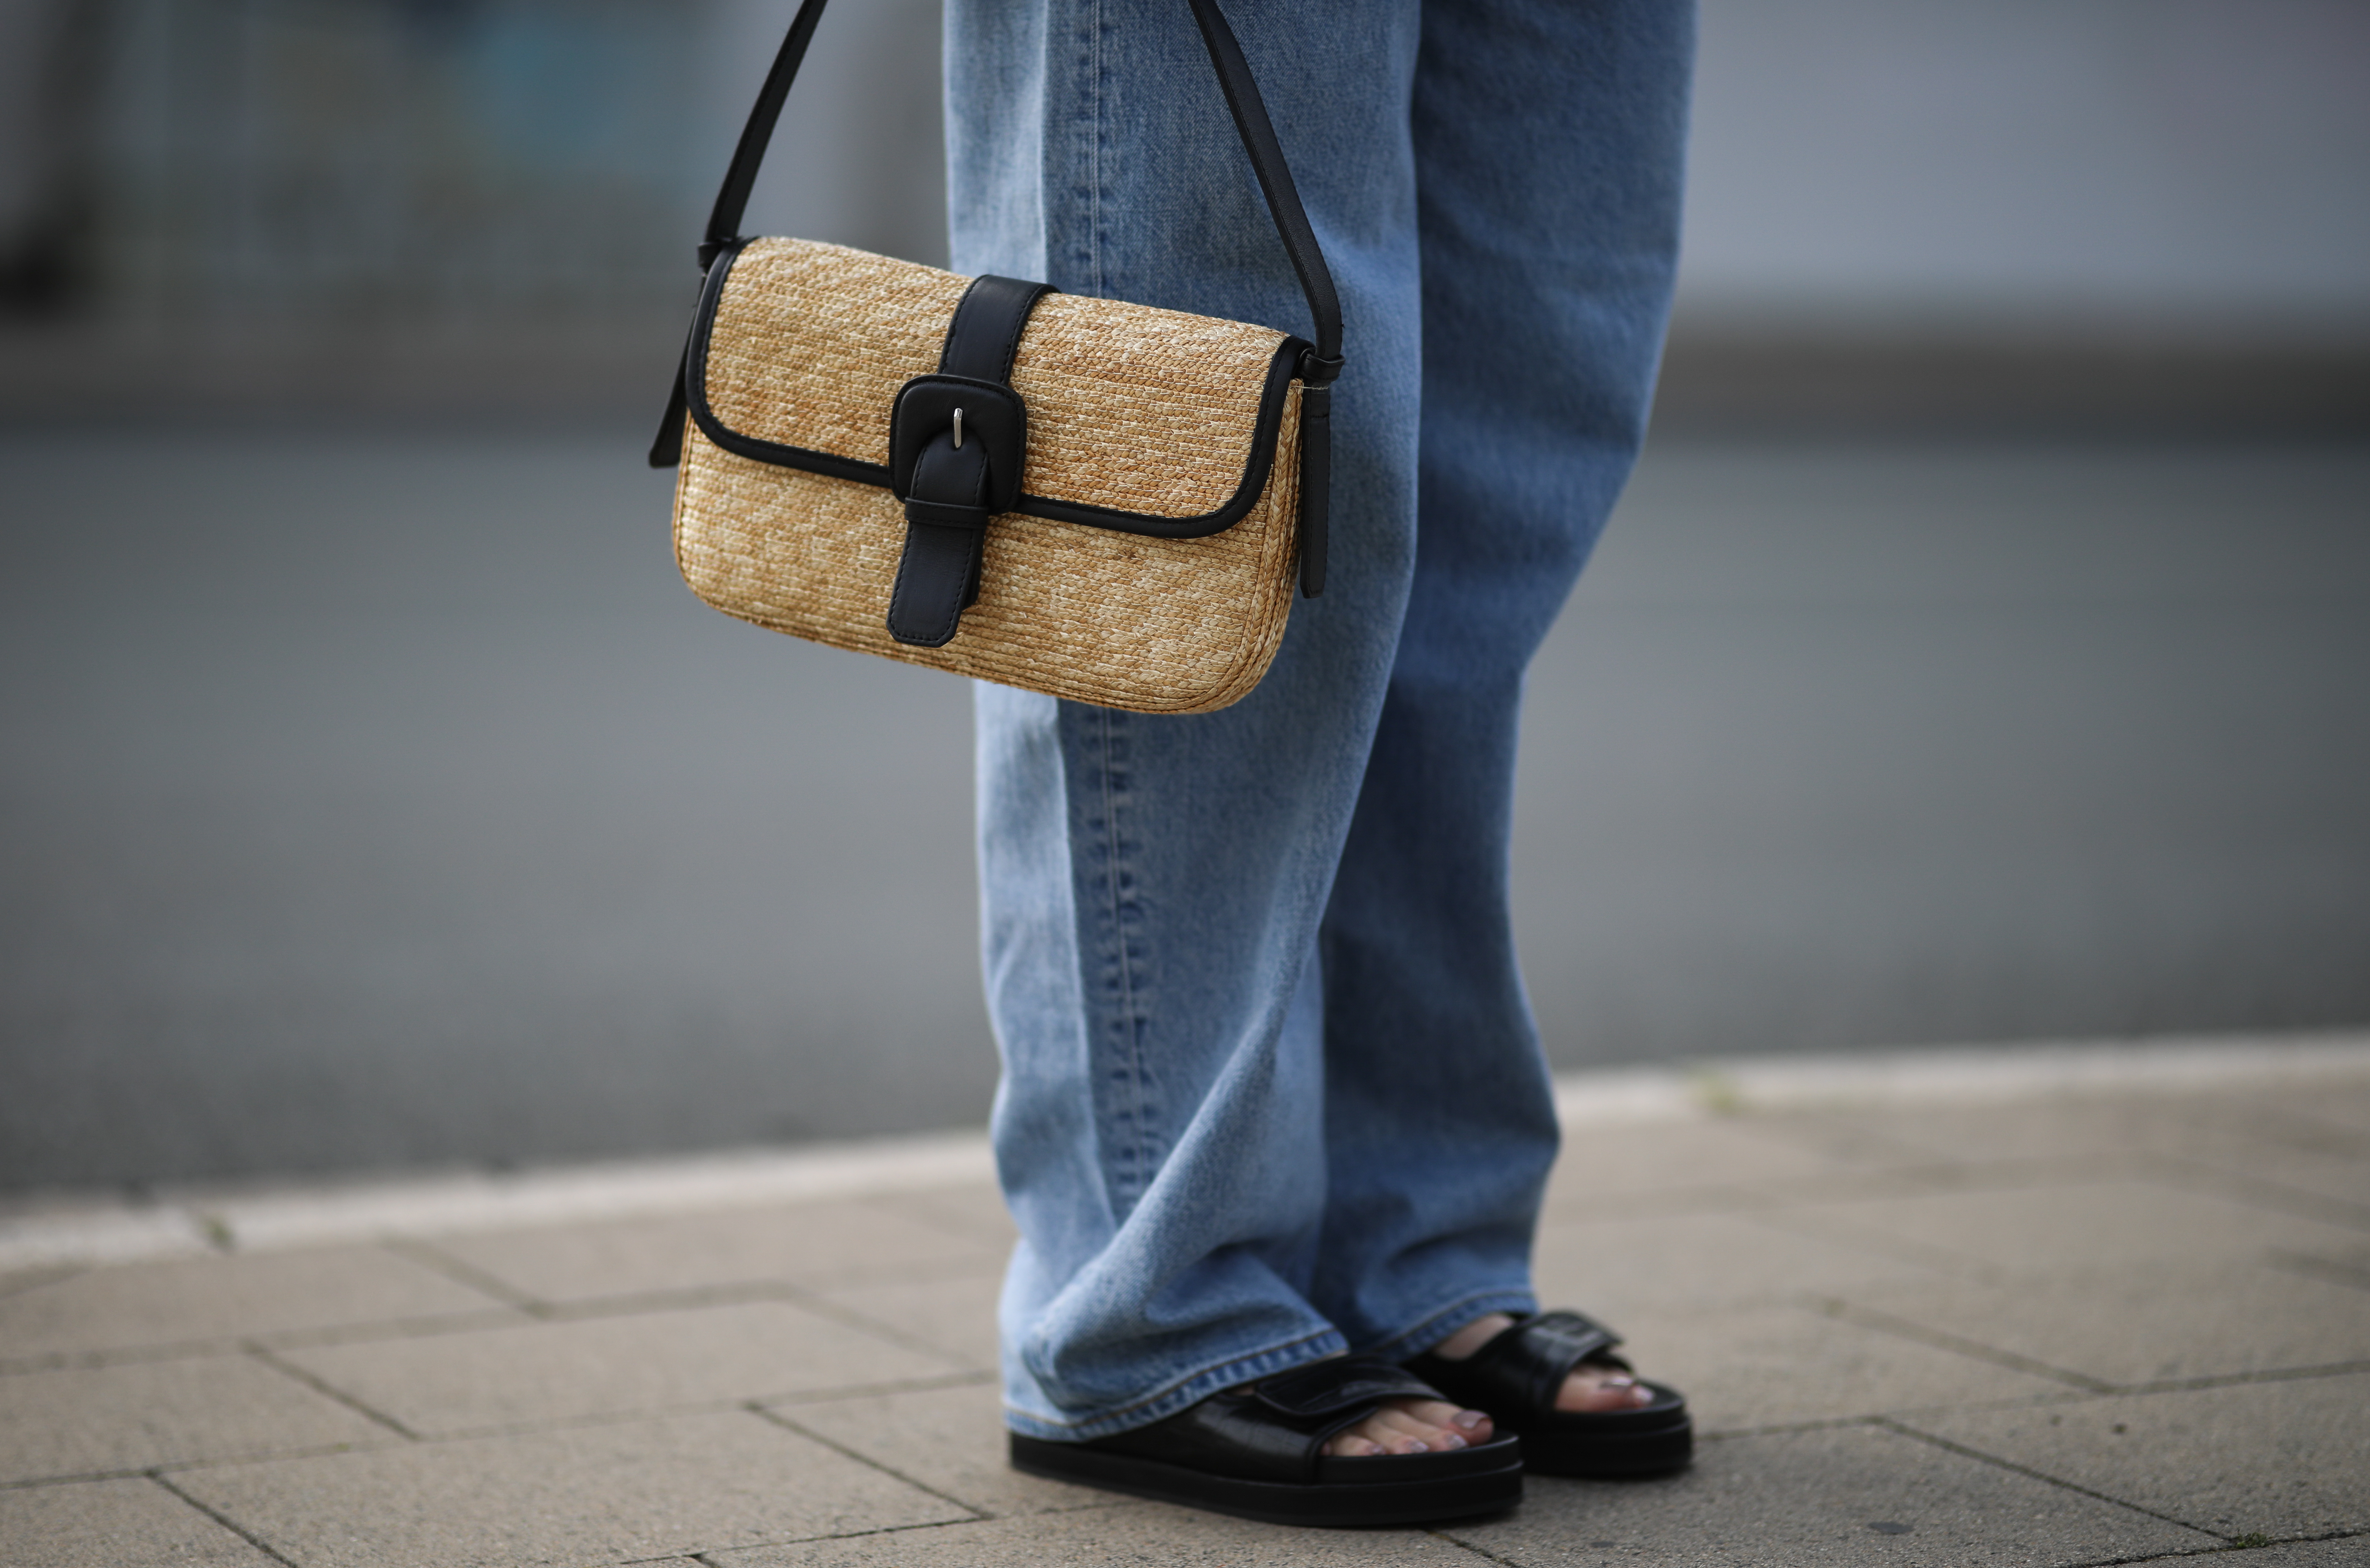 Jeans paired with black leather dad sandals and a straw baguette bag on August 15, 2020, in Germany | Source: Getty Images